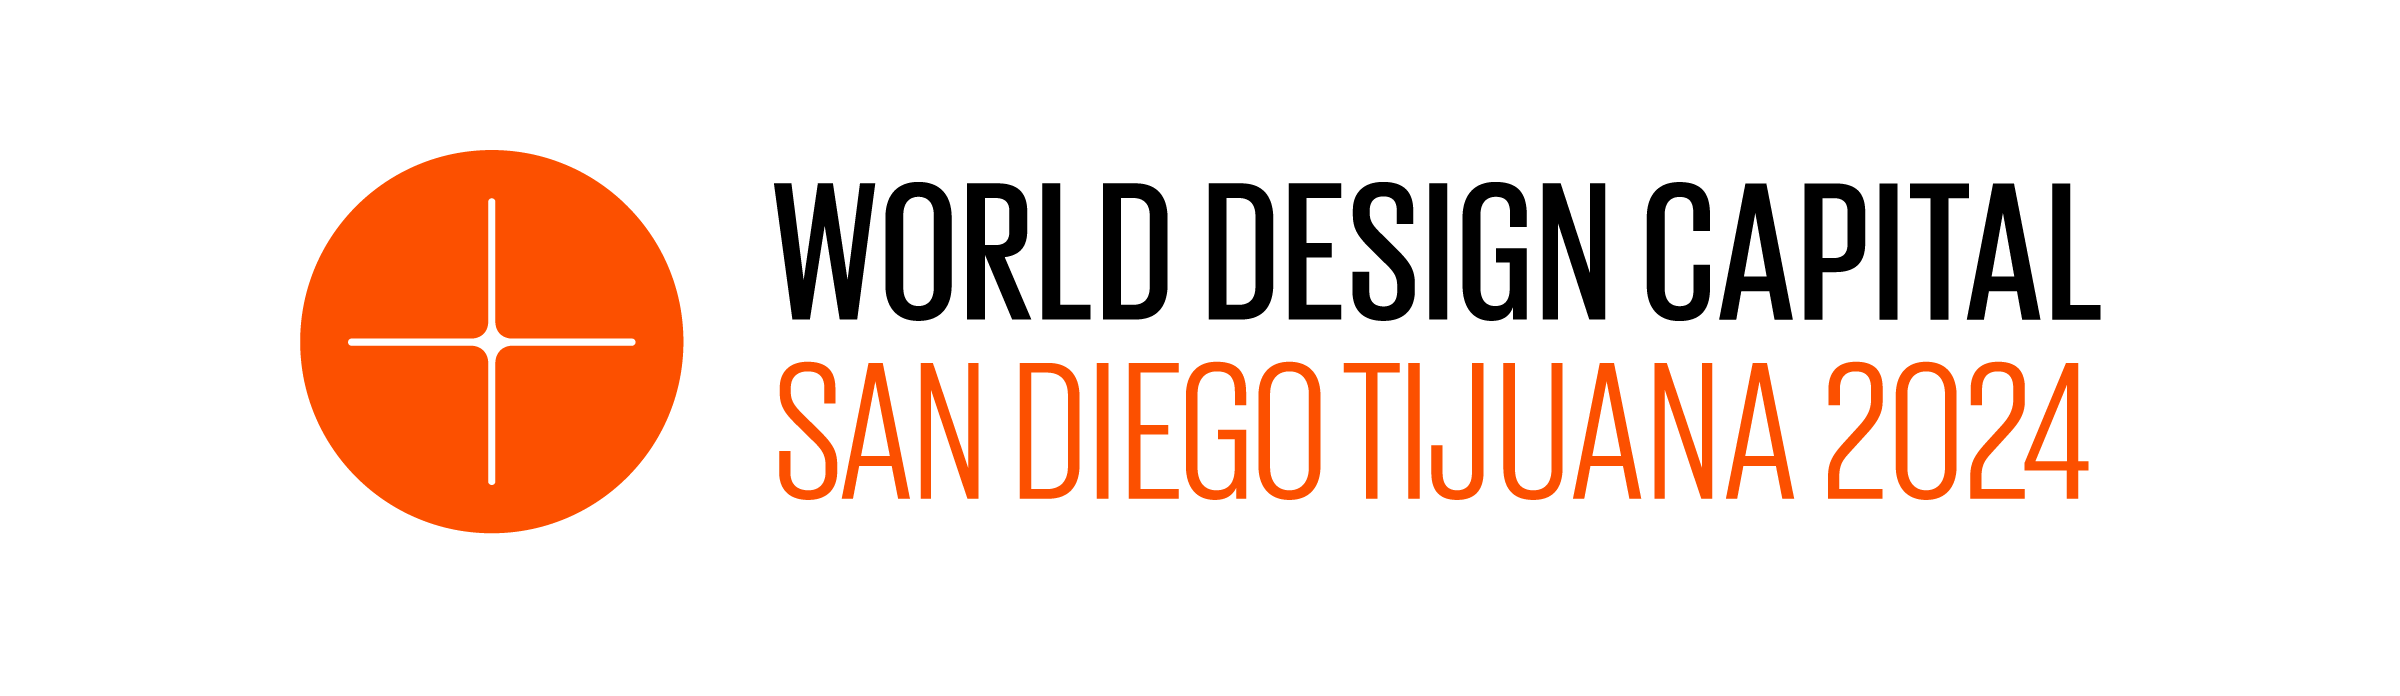 WOW Festival is proud to be part of the Official Calendar of World Design Capital San Diego Tijuana 2024.